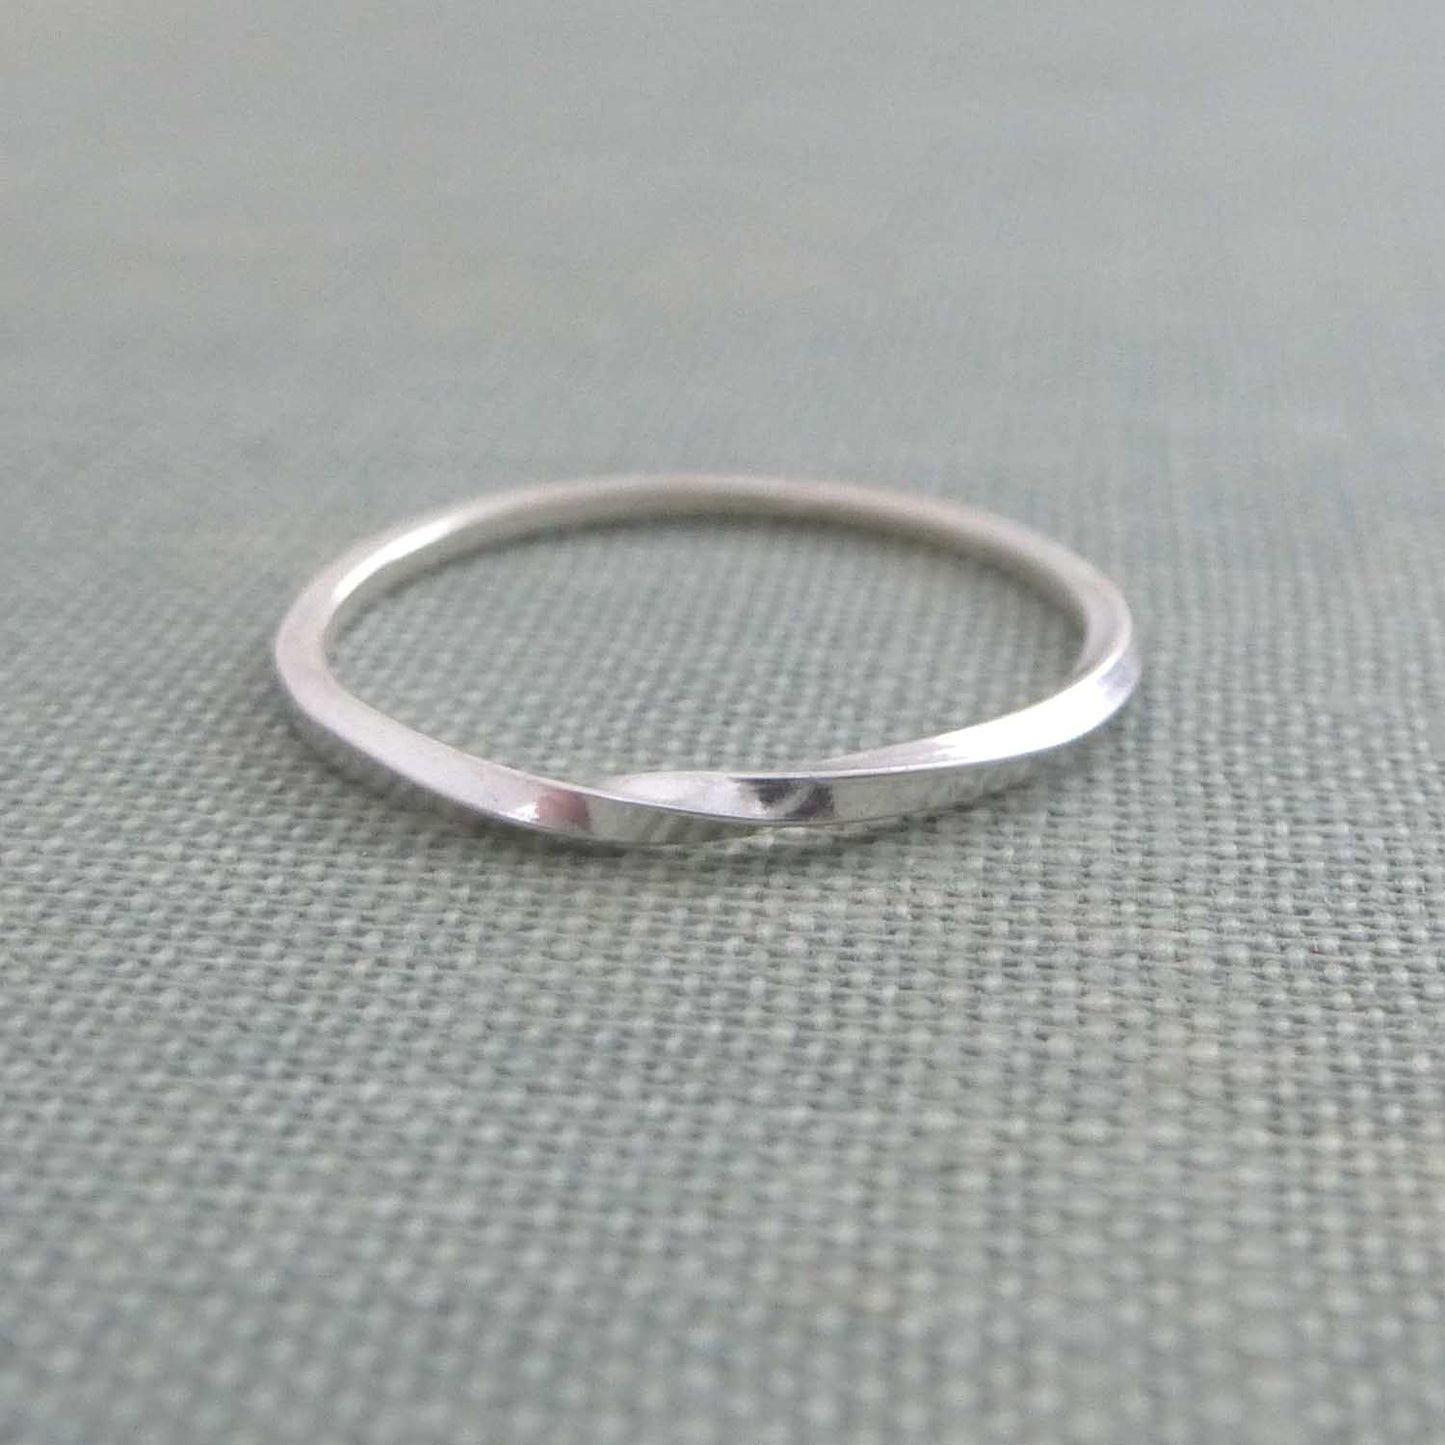 Skinny twist band ring - Sterling silver